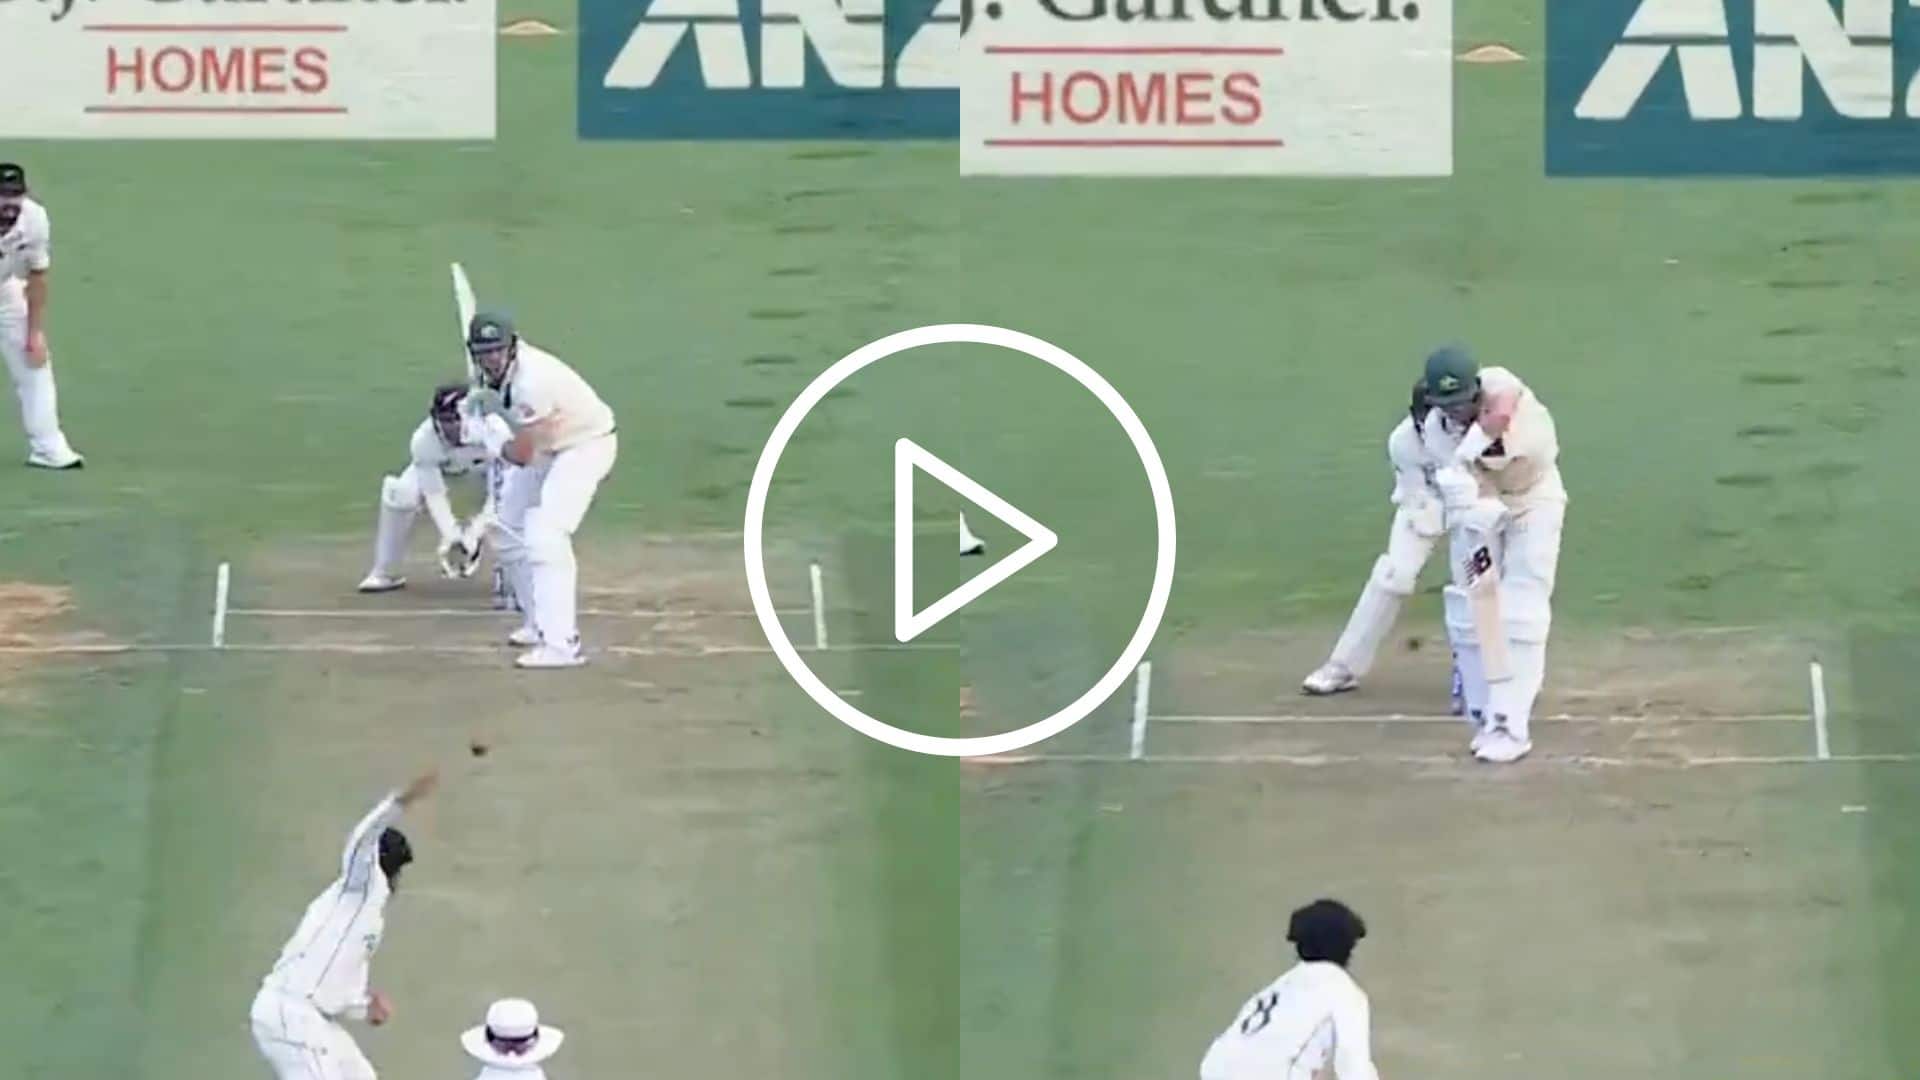 [Watch] Rachin Ravindra Traps Pat Cummins Plumb In Front With A Peach